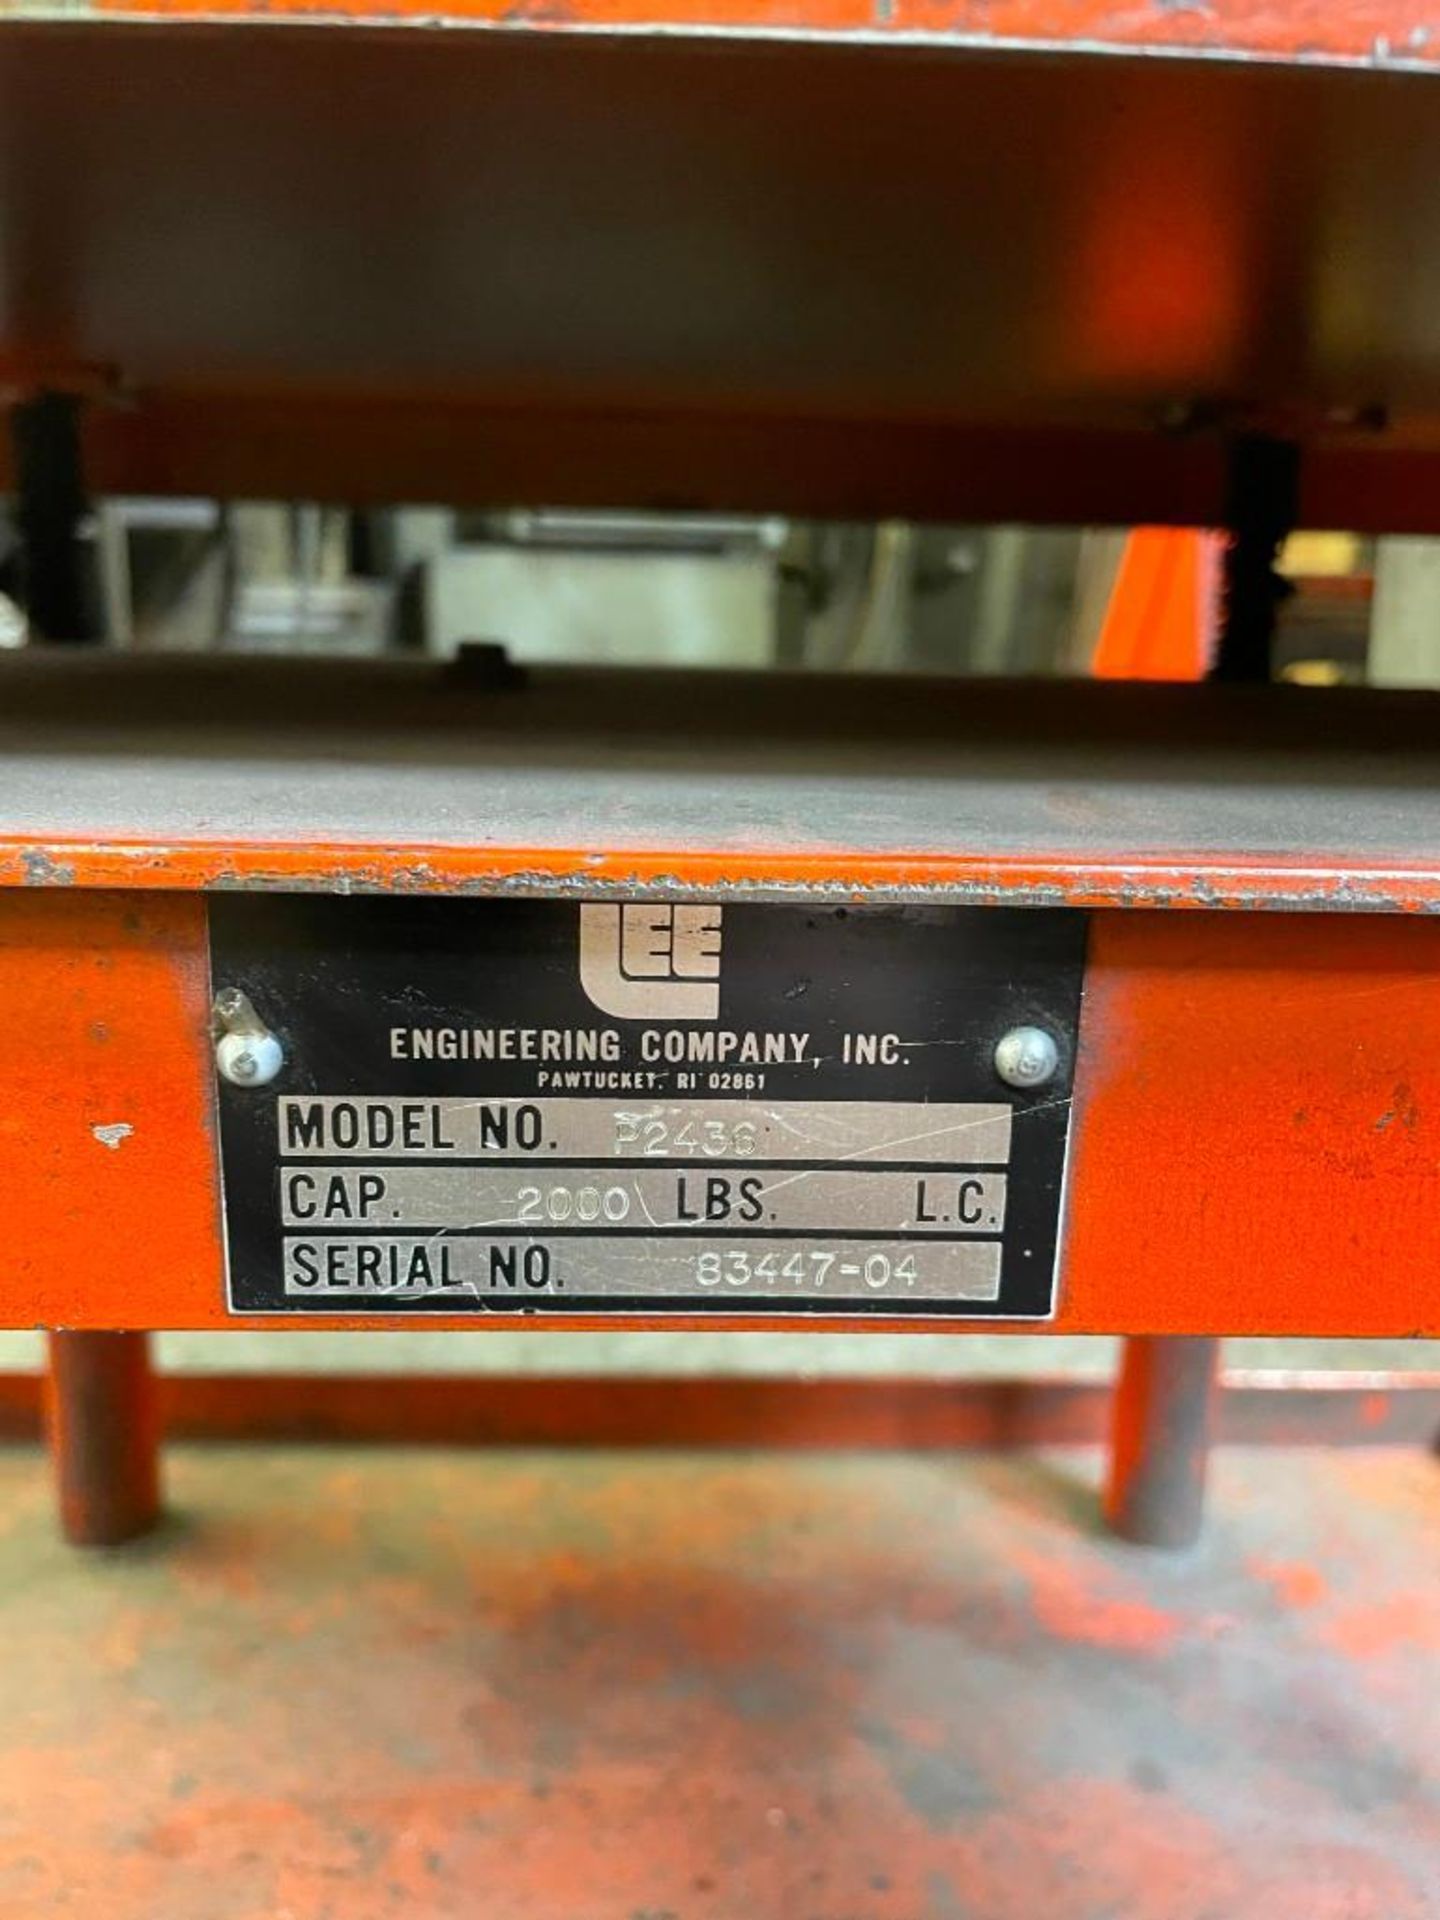 LEE ENGINEERING COMPANY P2436 MANUAL LIFT TABLE - Image 4 of 4